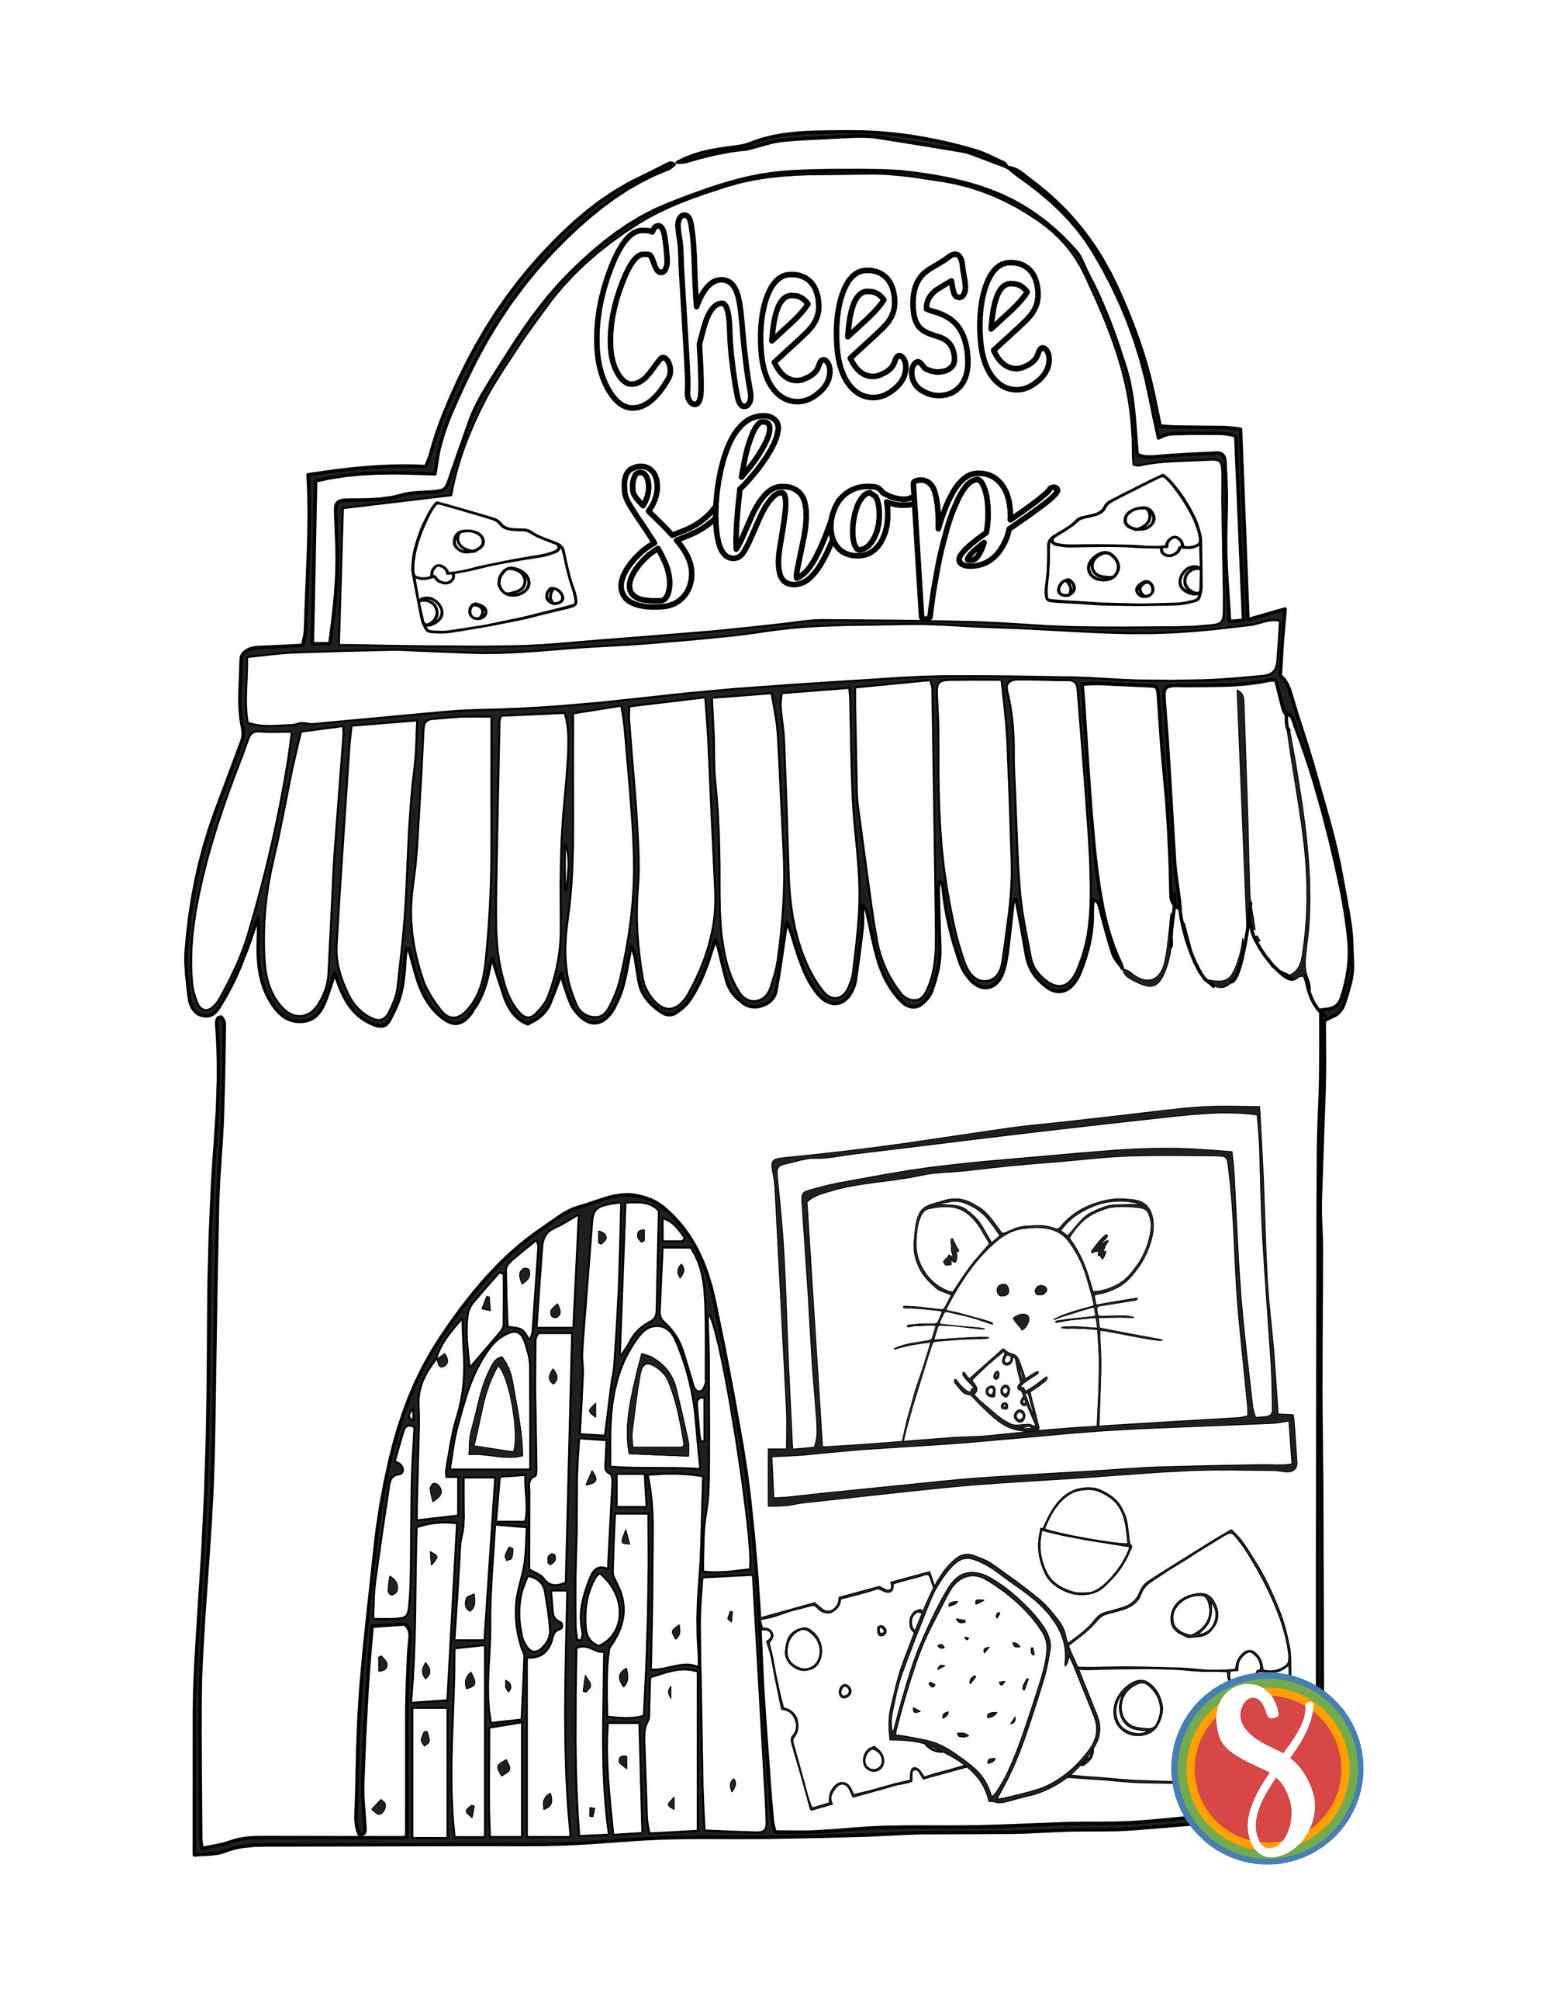 a simple drawing of a cheese shop with a little mouse holding cheese seen through the window